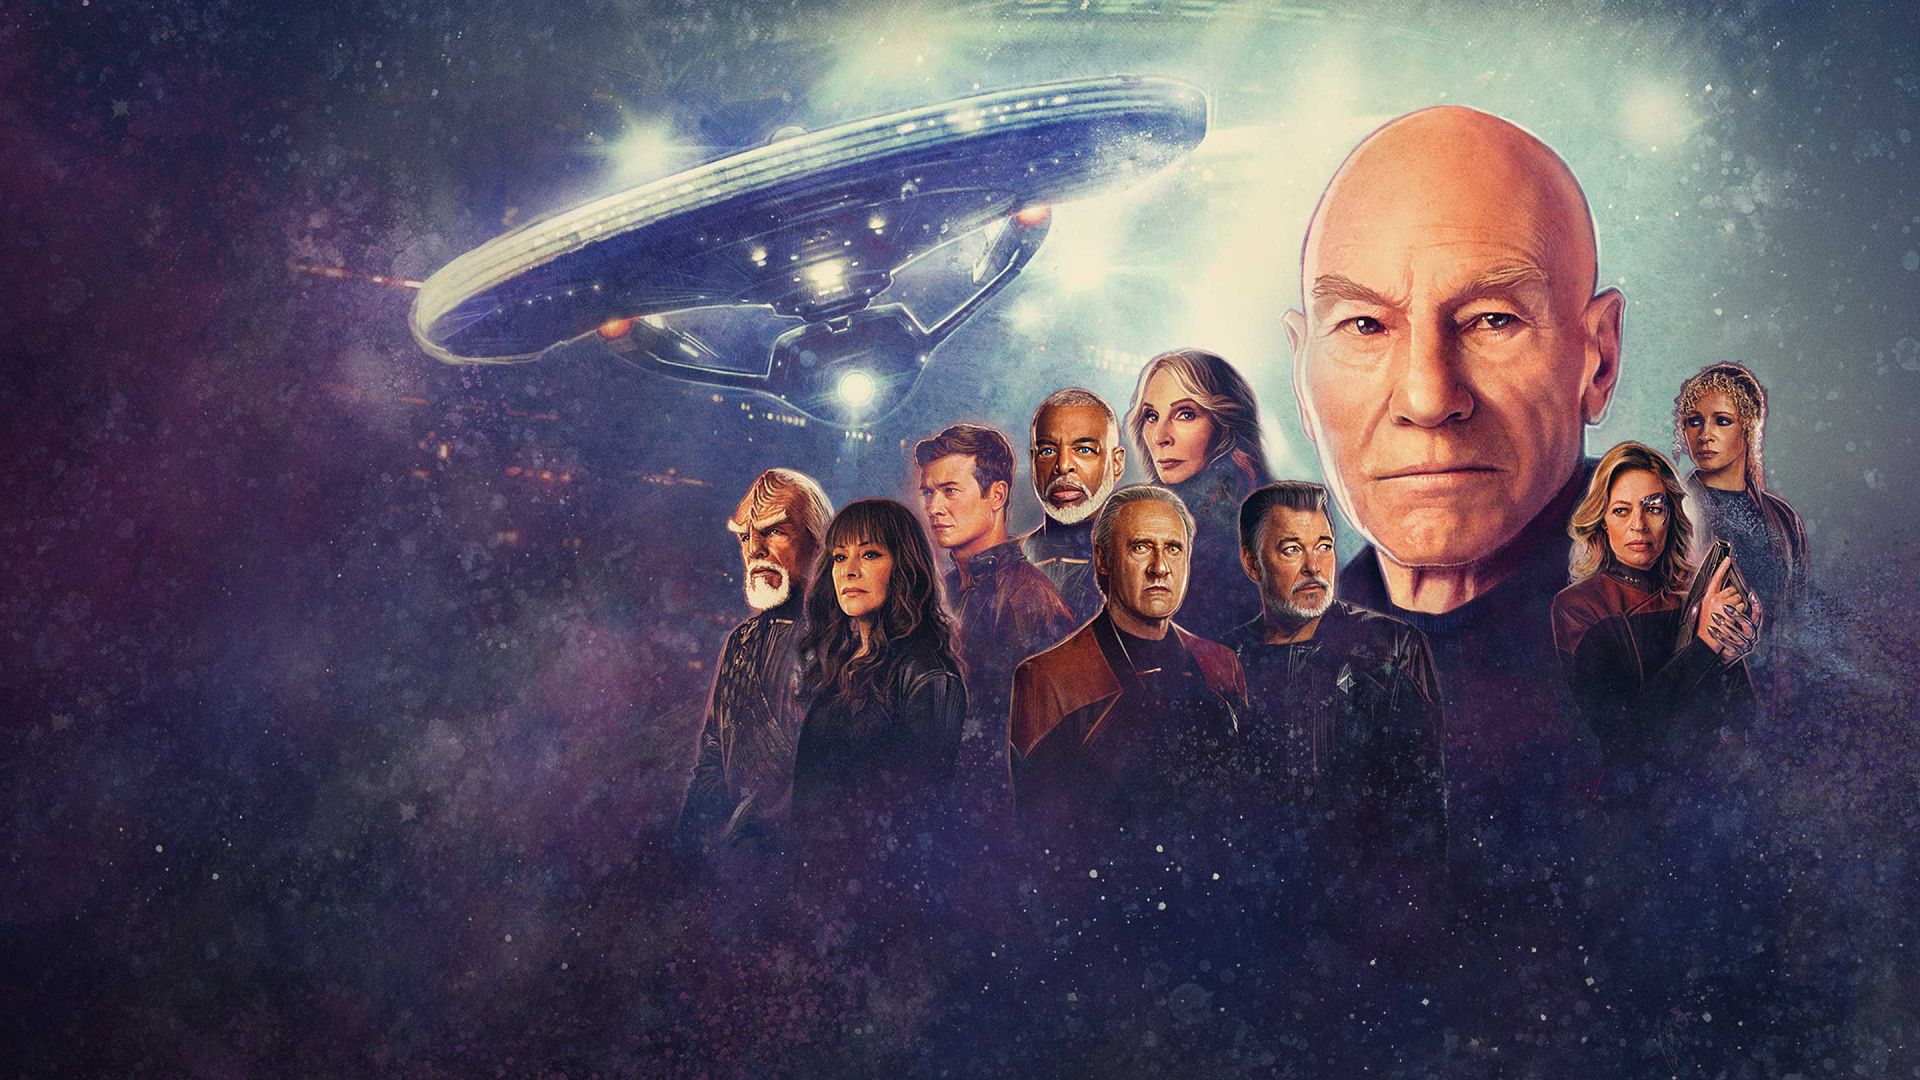 Every 'Star Trek' Series and Movie on Paramount+ 2023: Stream for Free